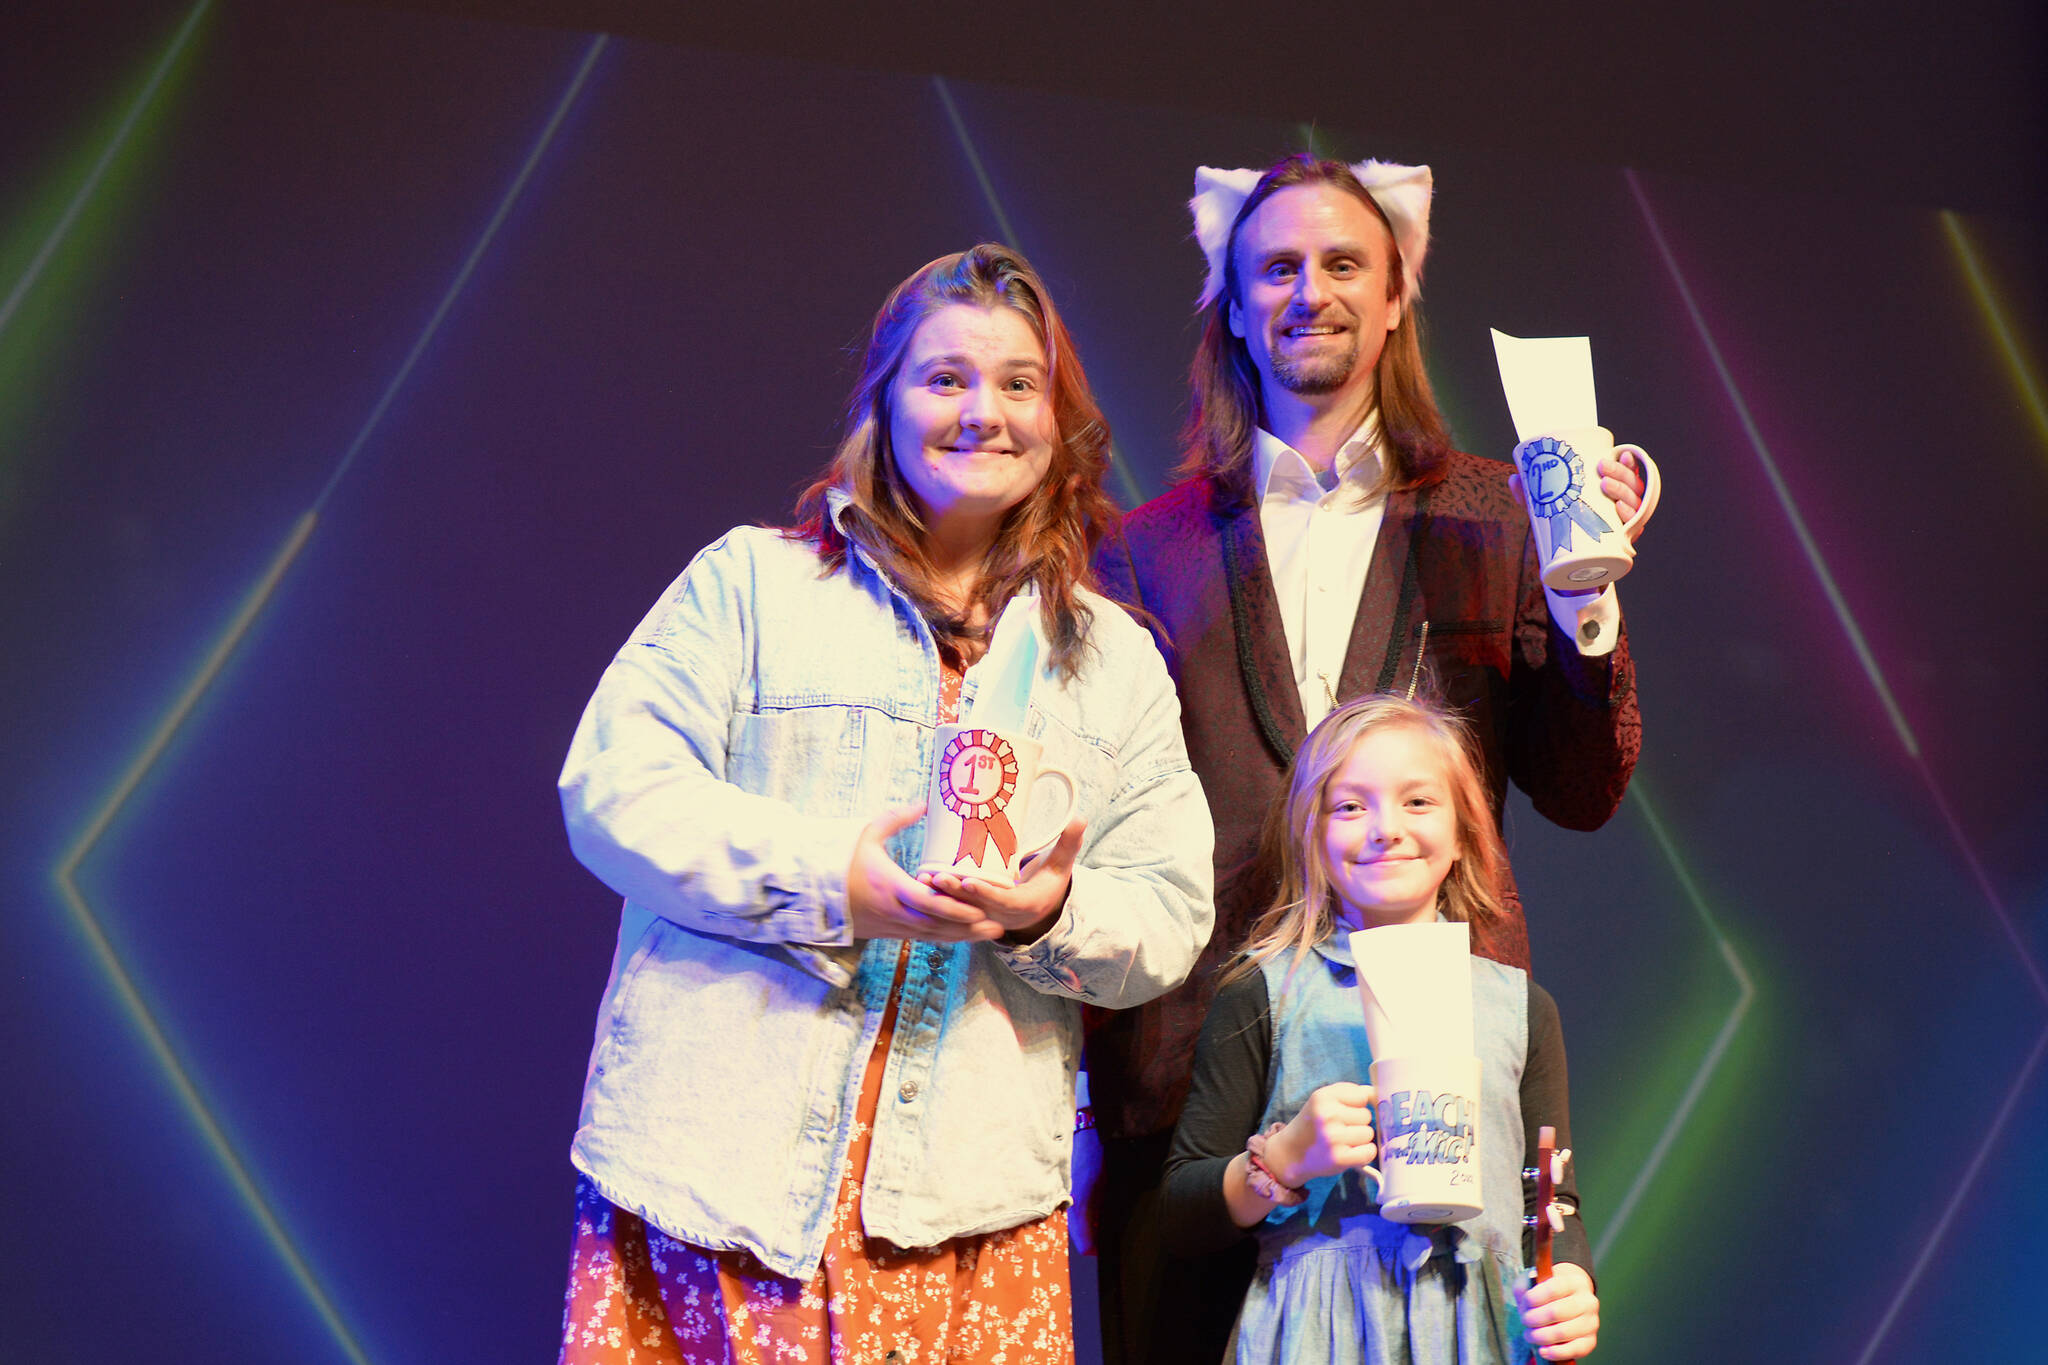 Reach for the Mic winners Zavenda Blackmore, Matty Turner, and Hillaree Blackmore pose together on stage after the competition on Oct. 28. (Photo by Kelsey Yates)